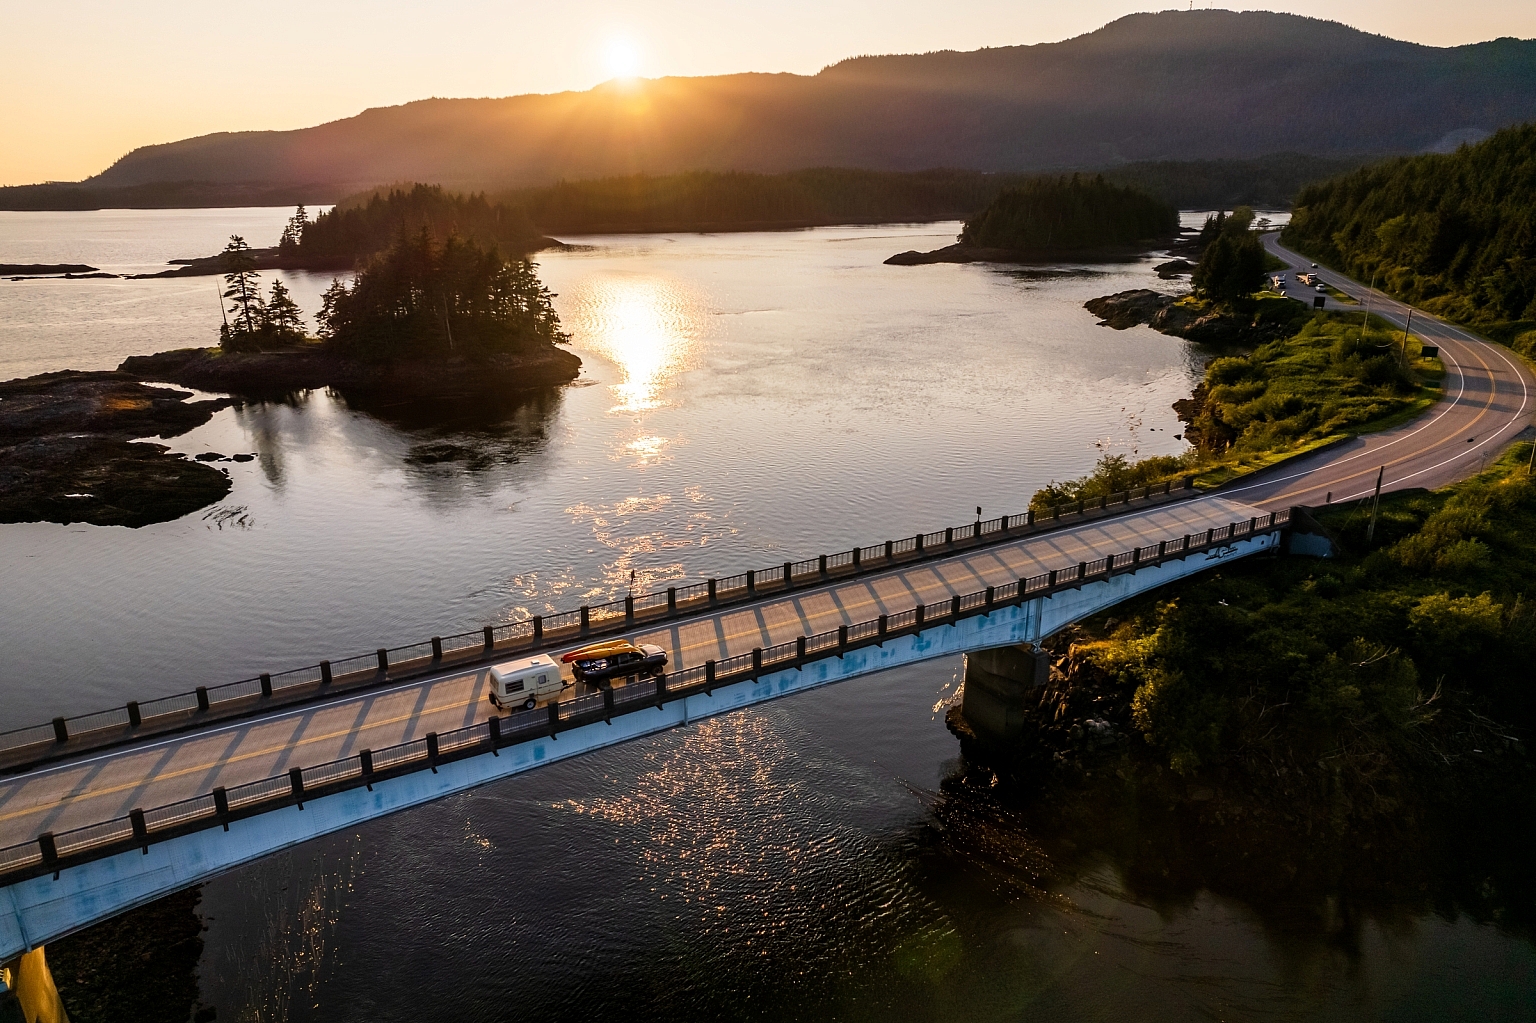 An truck with kayaks and a trailer drives across a bridge at sunset into Prince Rupert. Mountains are in the distance, and trees line the road past the bridge.